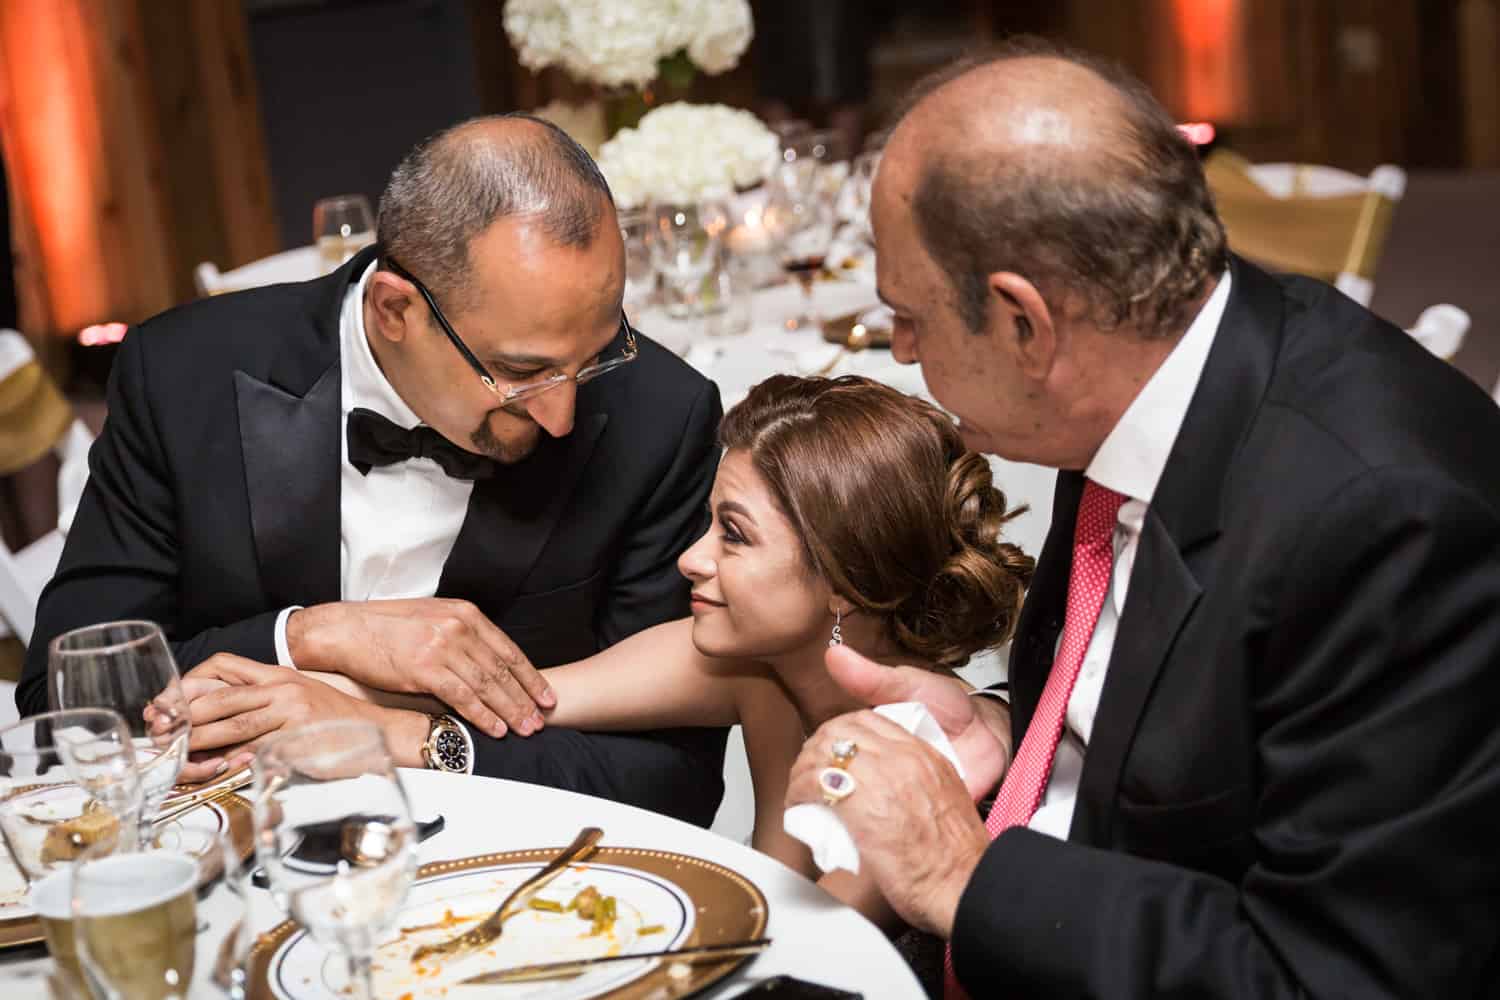 Bride talking with two men at table during Florida wedding reception